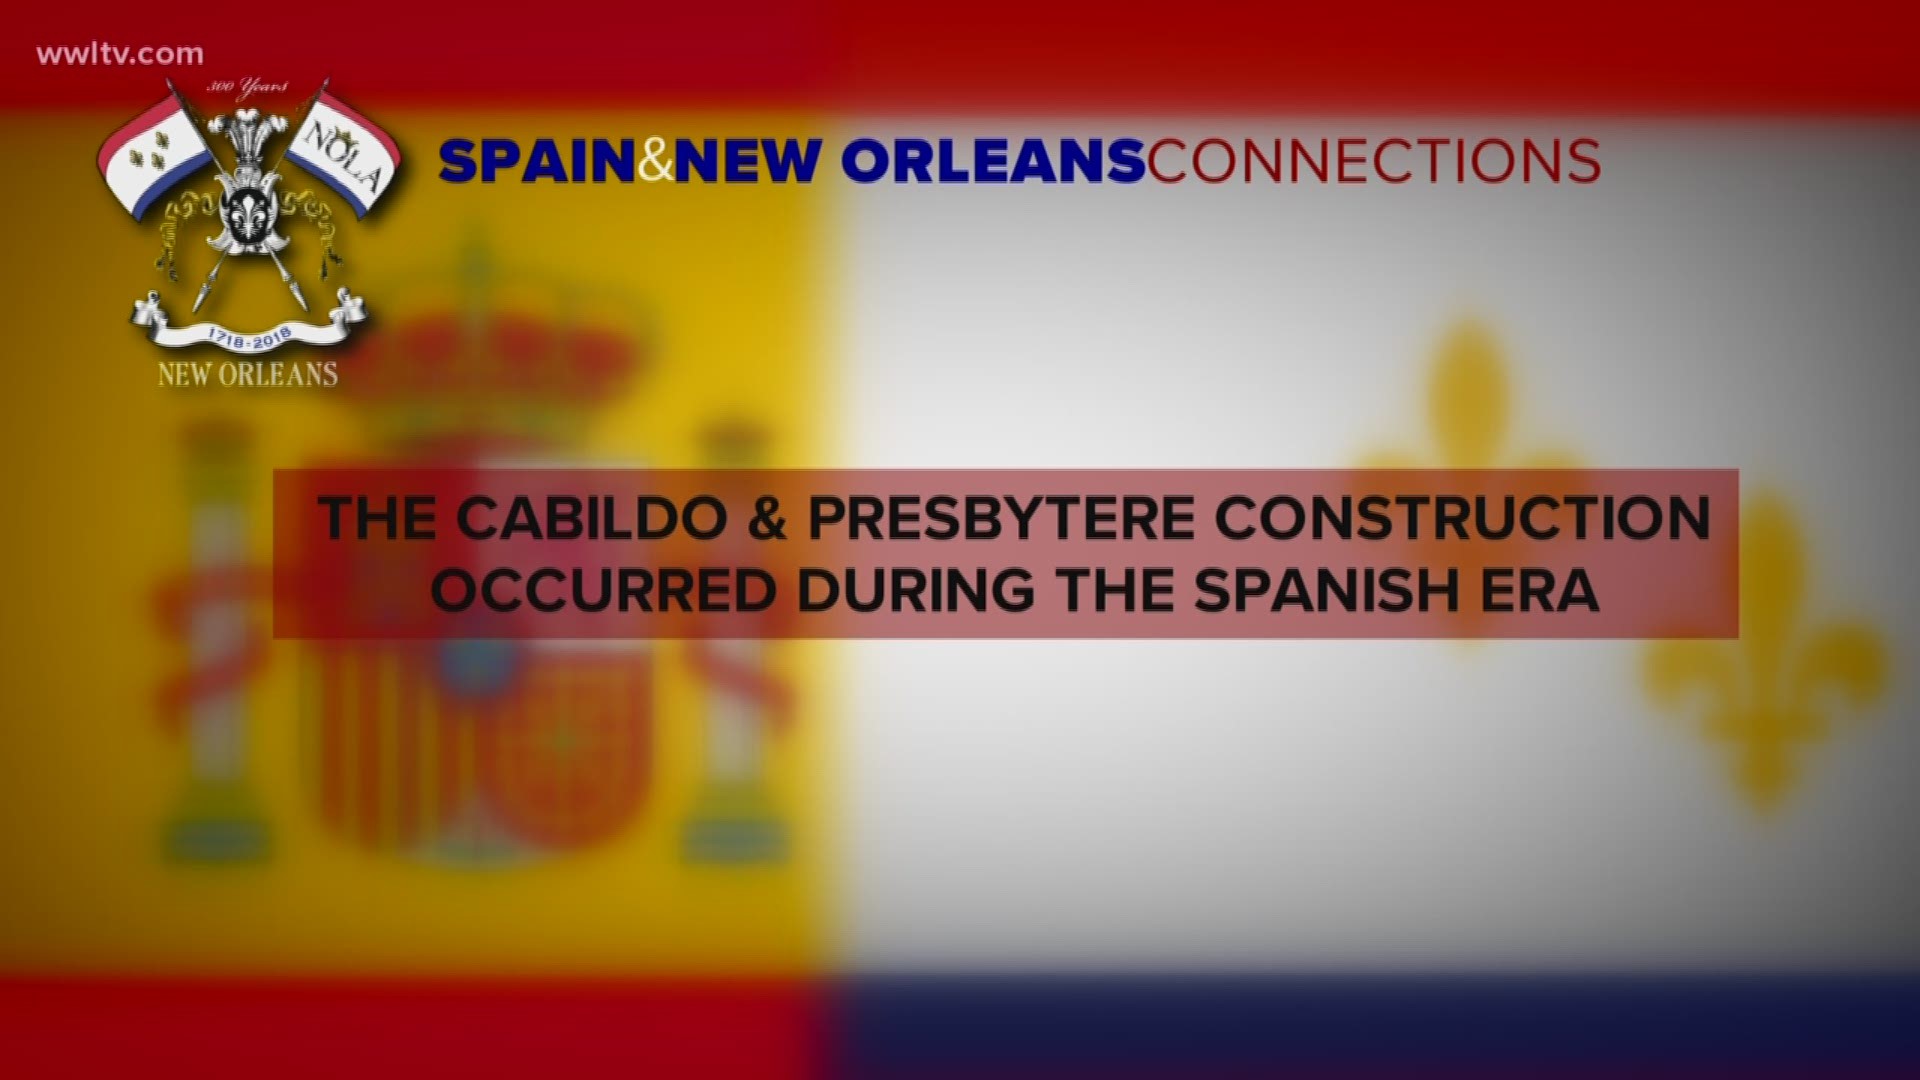 Spain and New Orleans share a large connection.